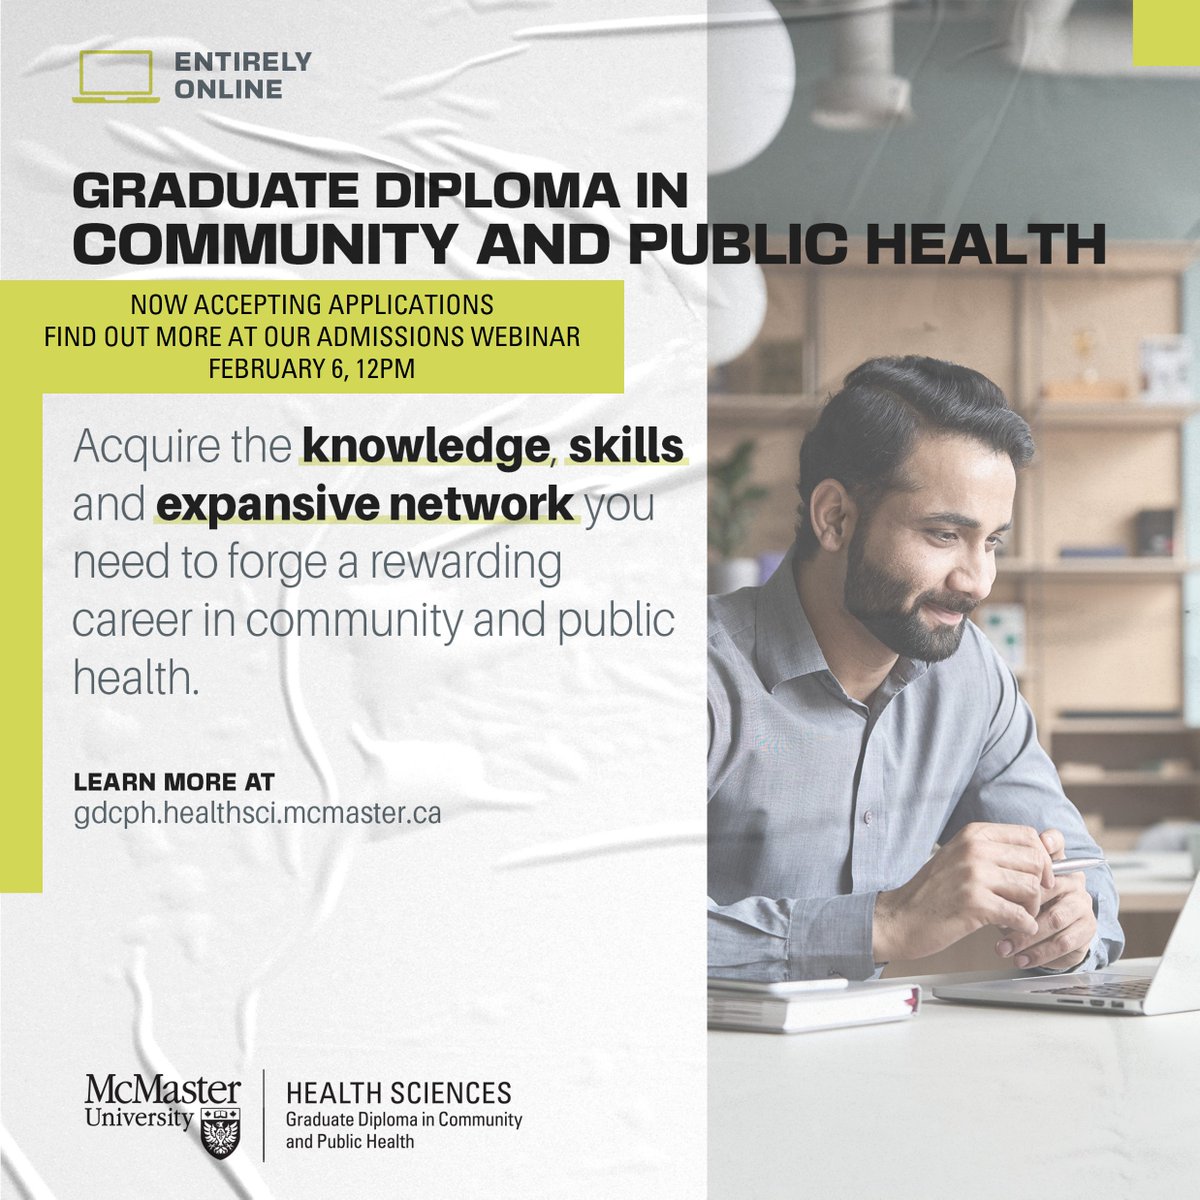 Want to find out more about this pathway into Public and Community Health opportunities? Join Dr. Laura Anderson and Gabi Watson for our Admissions Webinar on February 6, 2024 at 12pm ET. RSVP gdcph@mcmaster.ca for call information. #community #PublicHealth #graduate